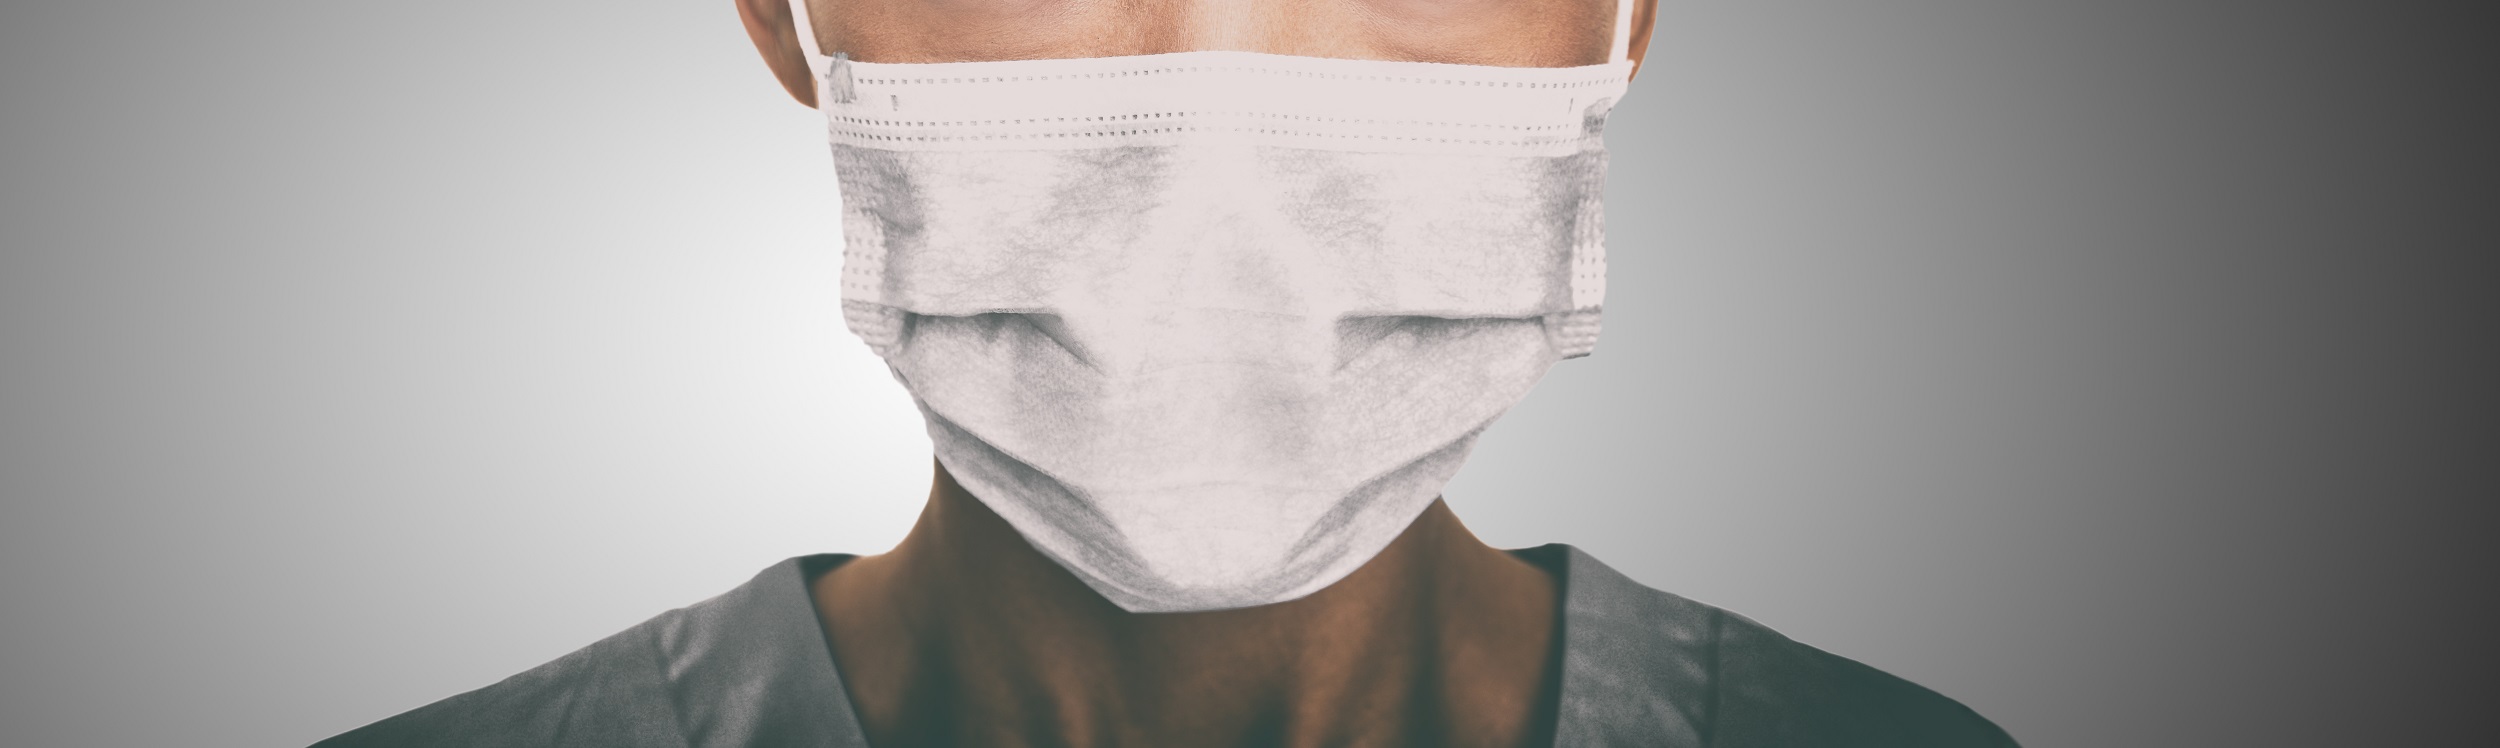 Lower half of a doctor's face, with a face mask.